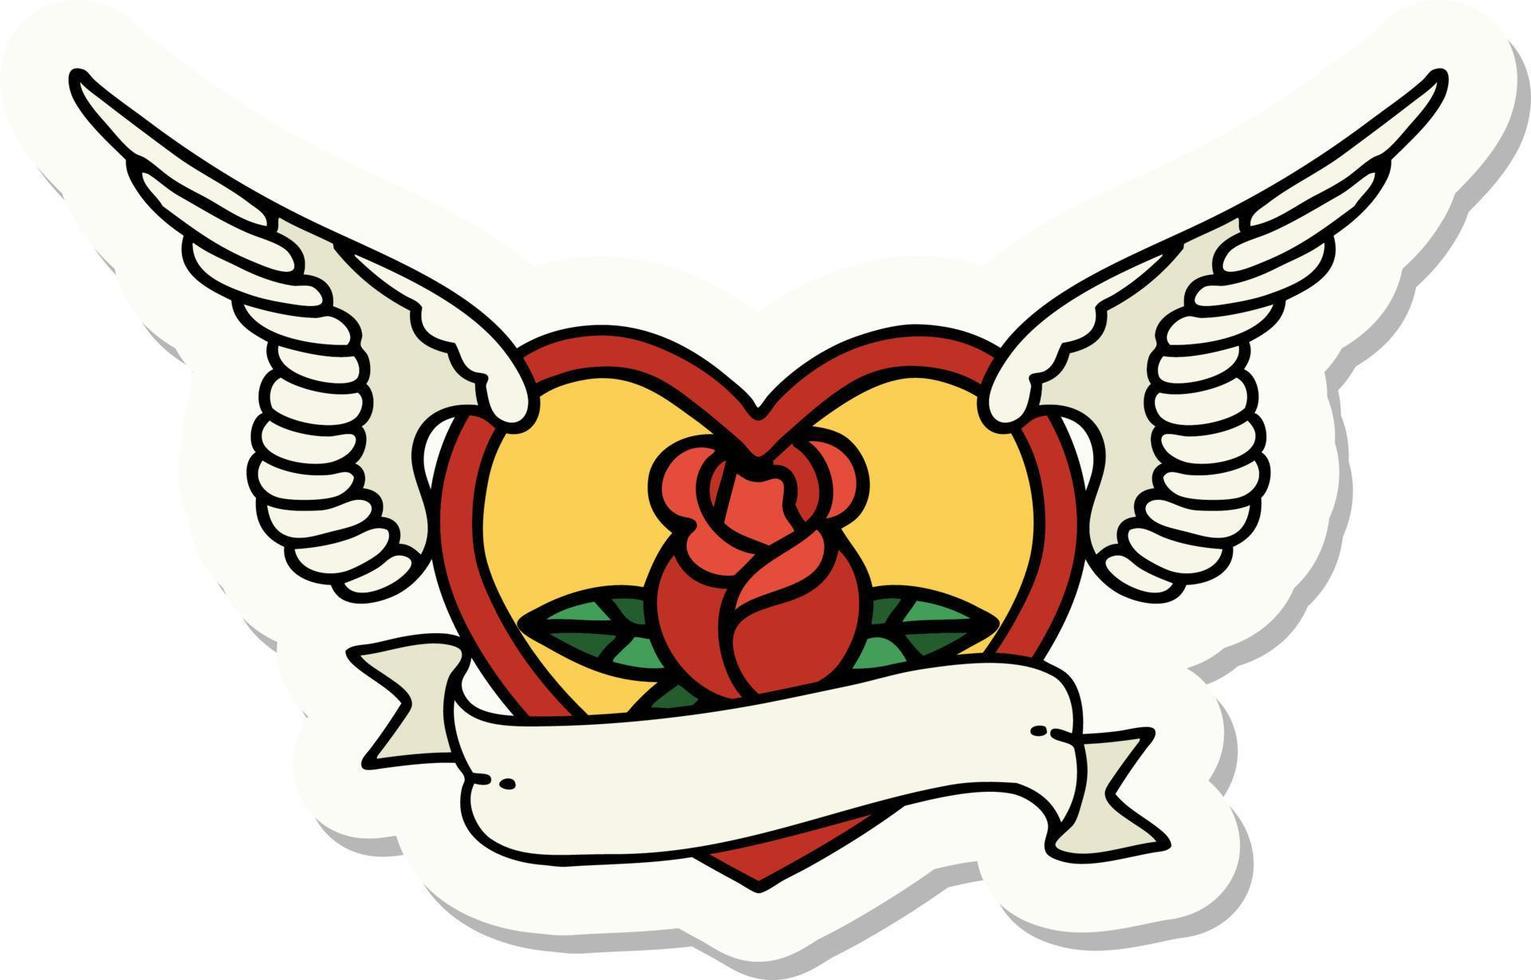 tattoo style sticker of a flying heart with flowers and banner vector